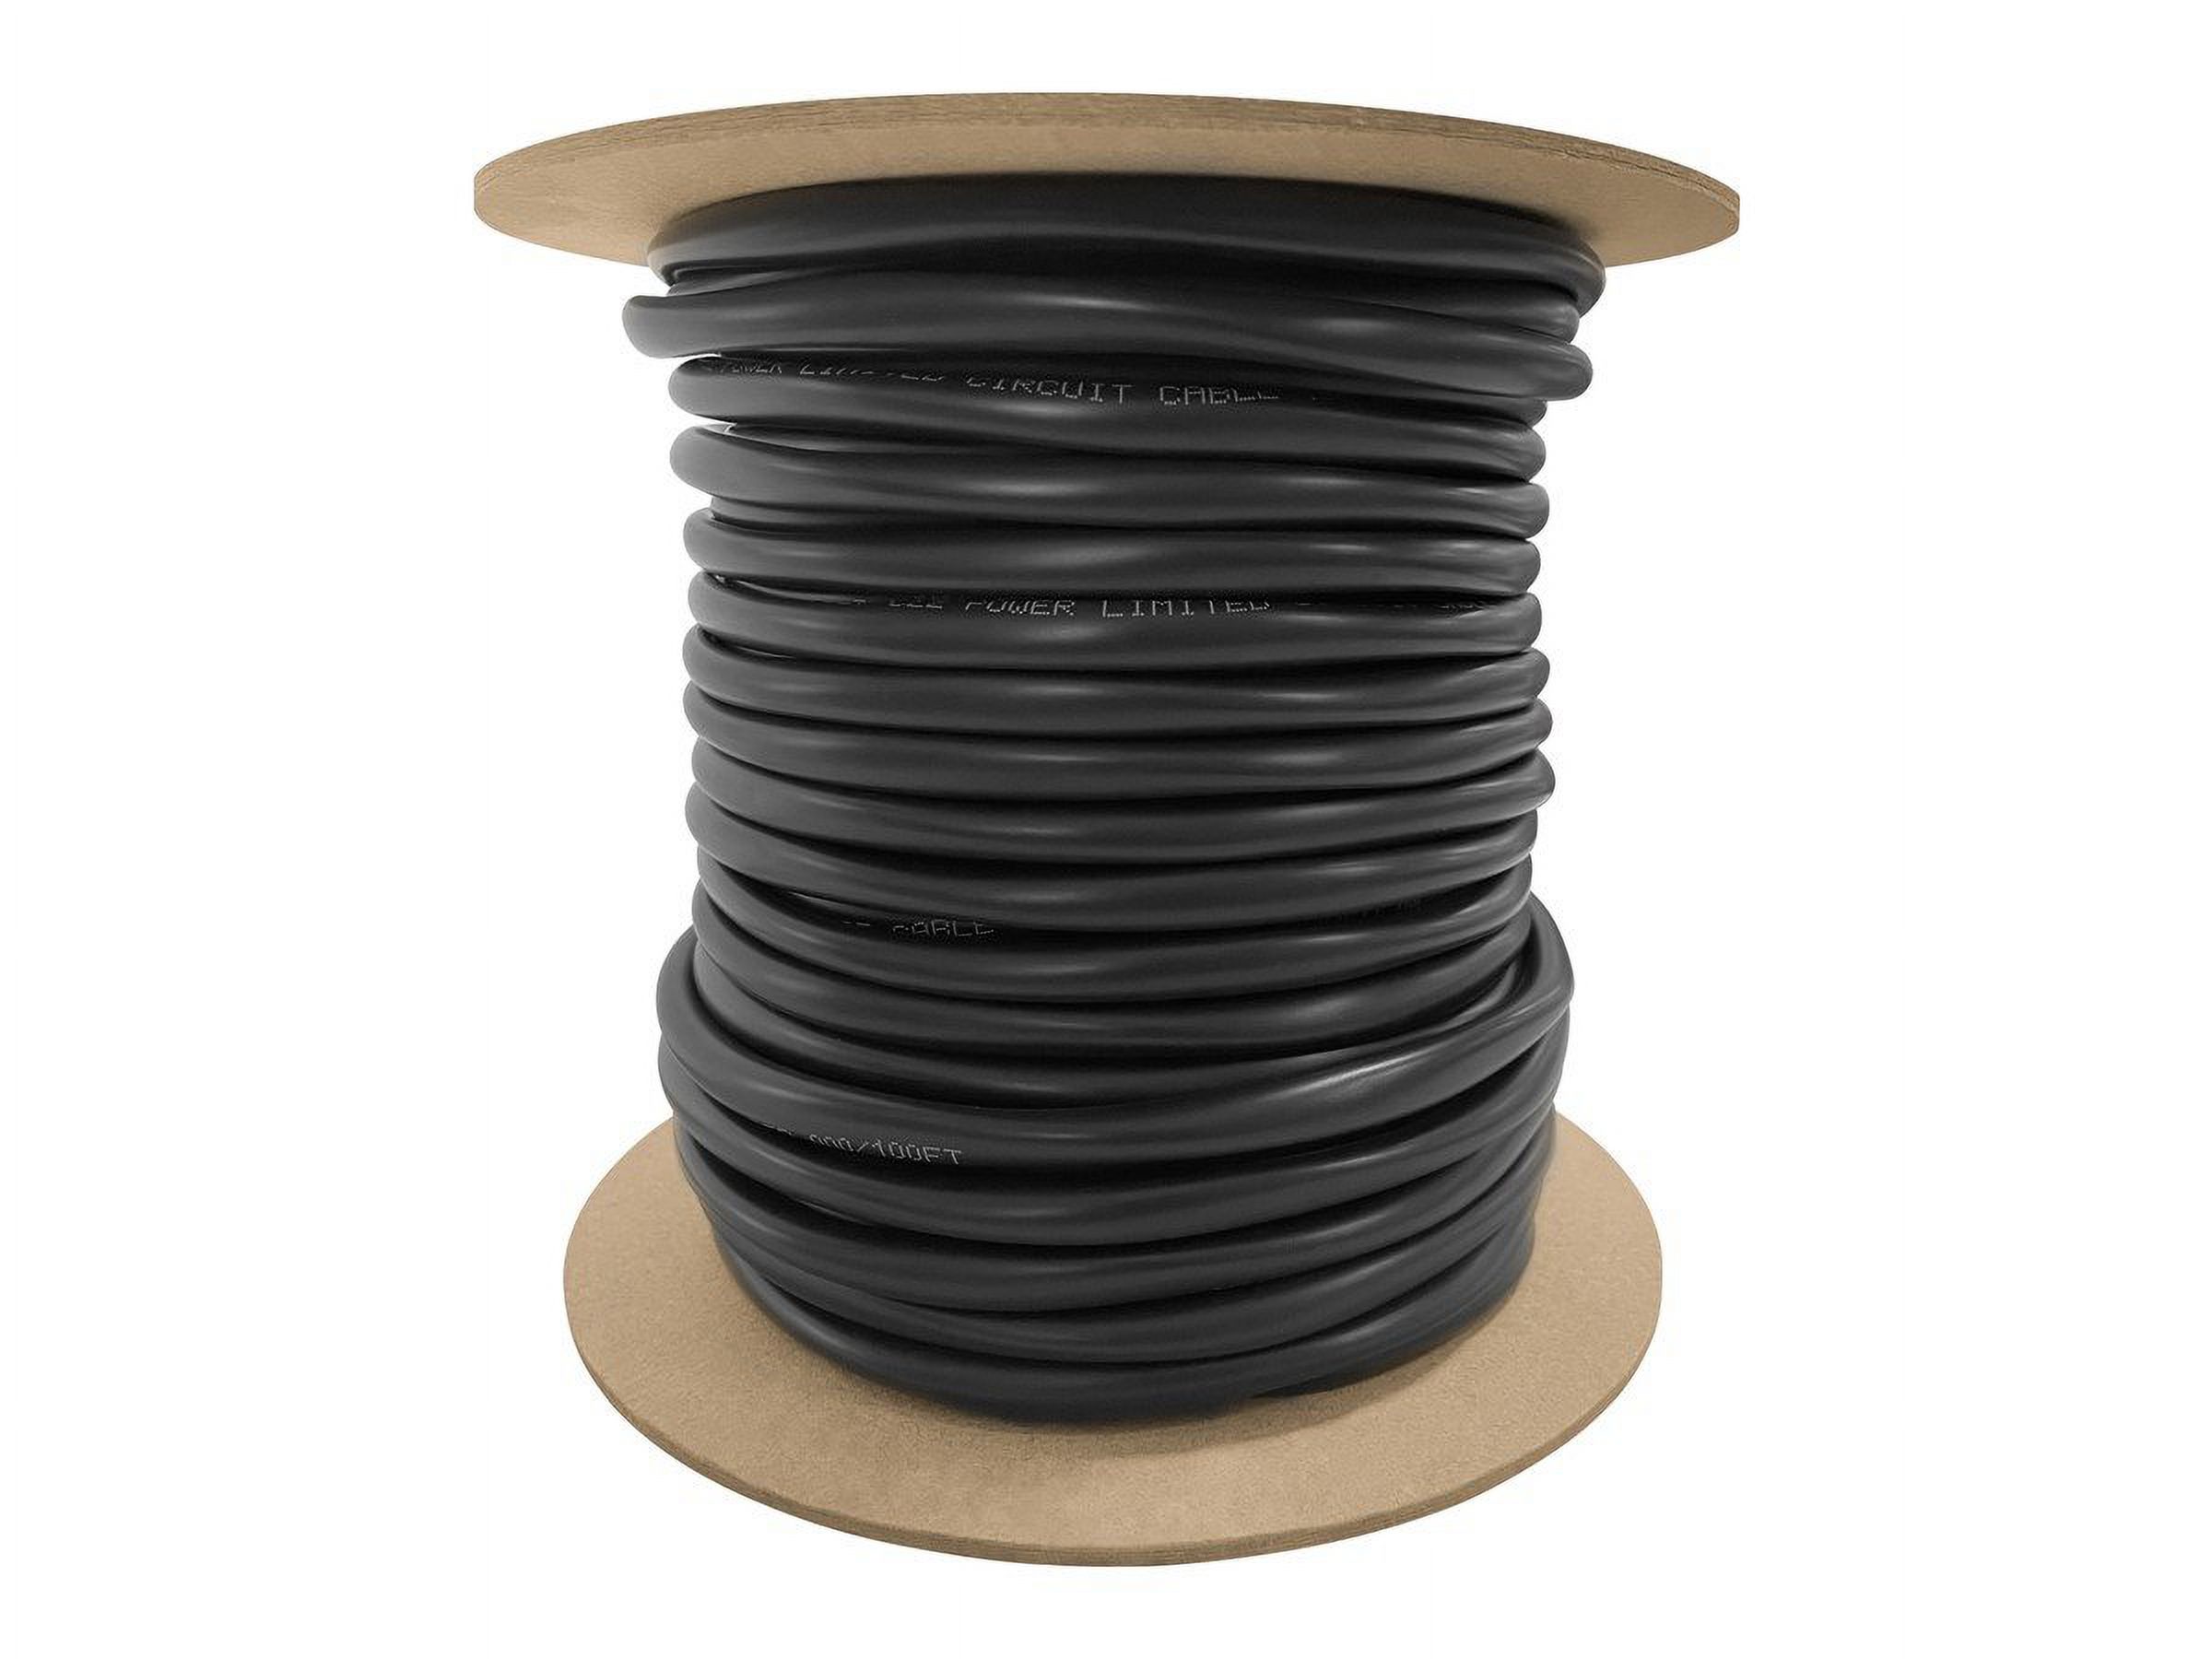 Monoprice Speaker Wire, CL2 Rated, 2-Conductor, 12AWG, 100ft, Black - image 4 of 6